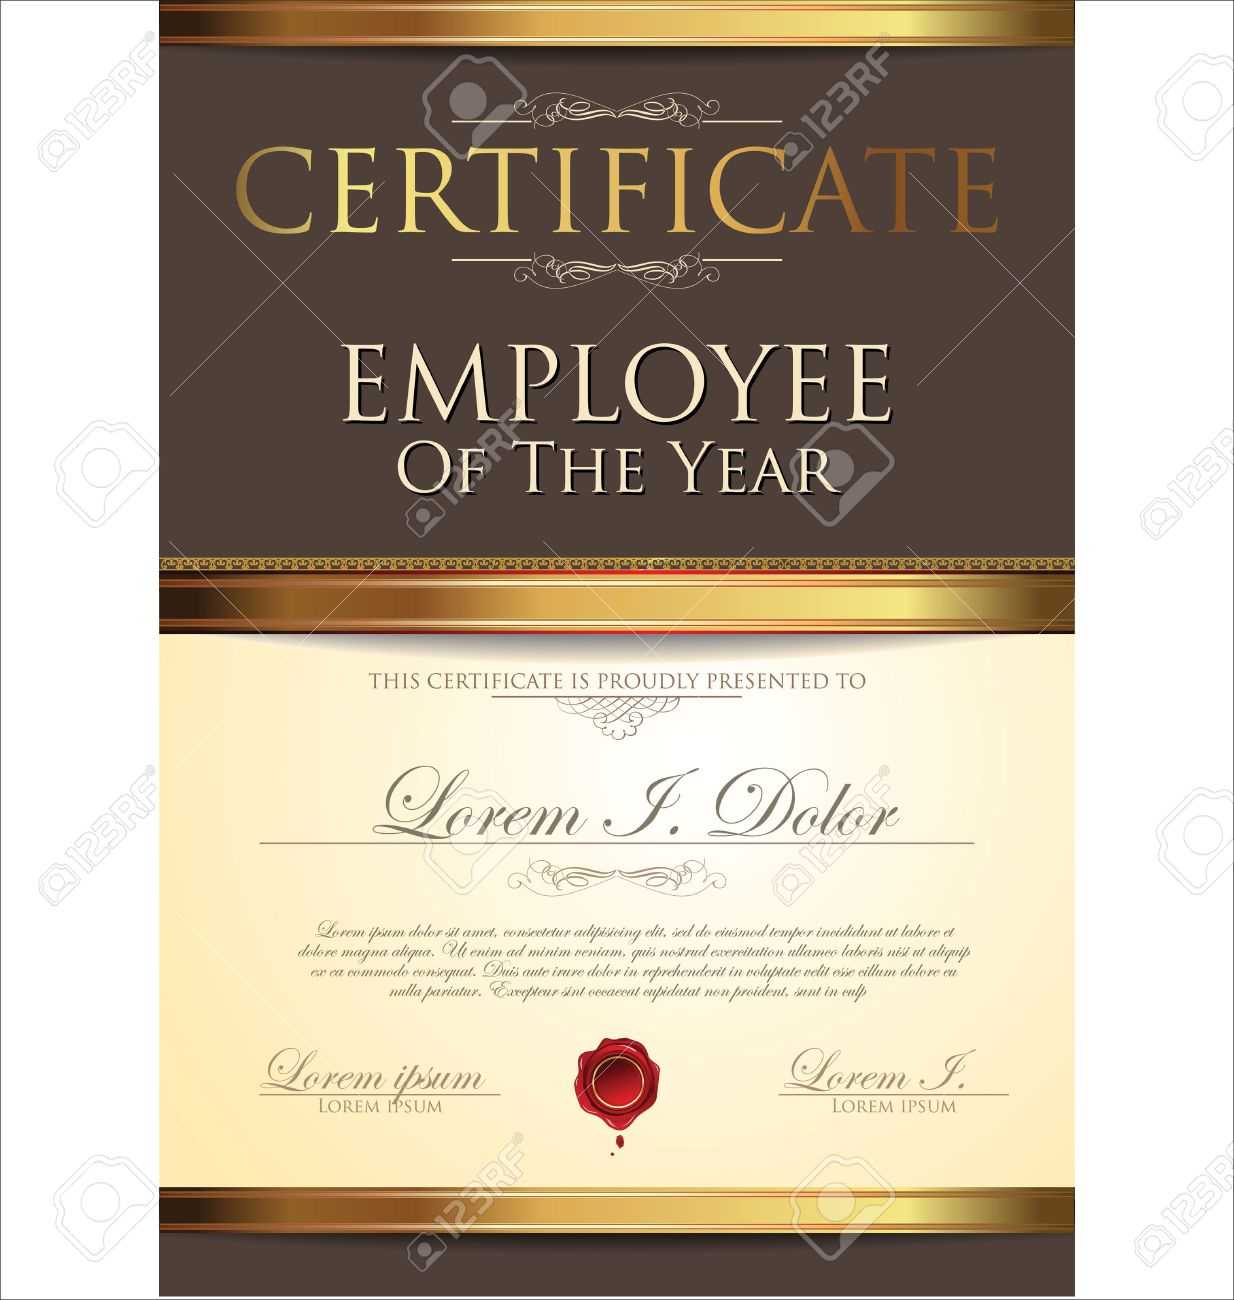 Certificate Template, Employee Of The Year Throughout Manager Of The Month Certificate Template